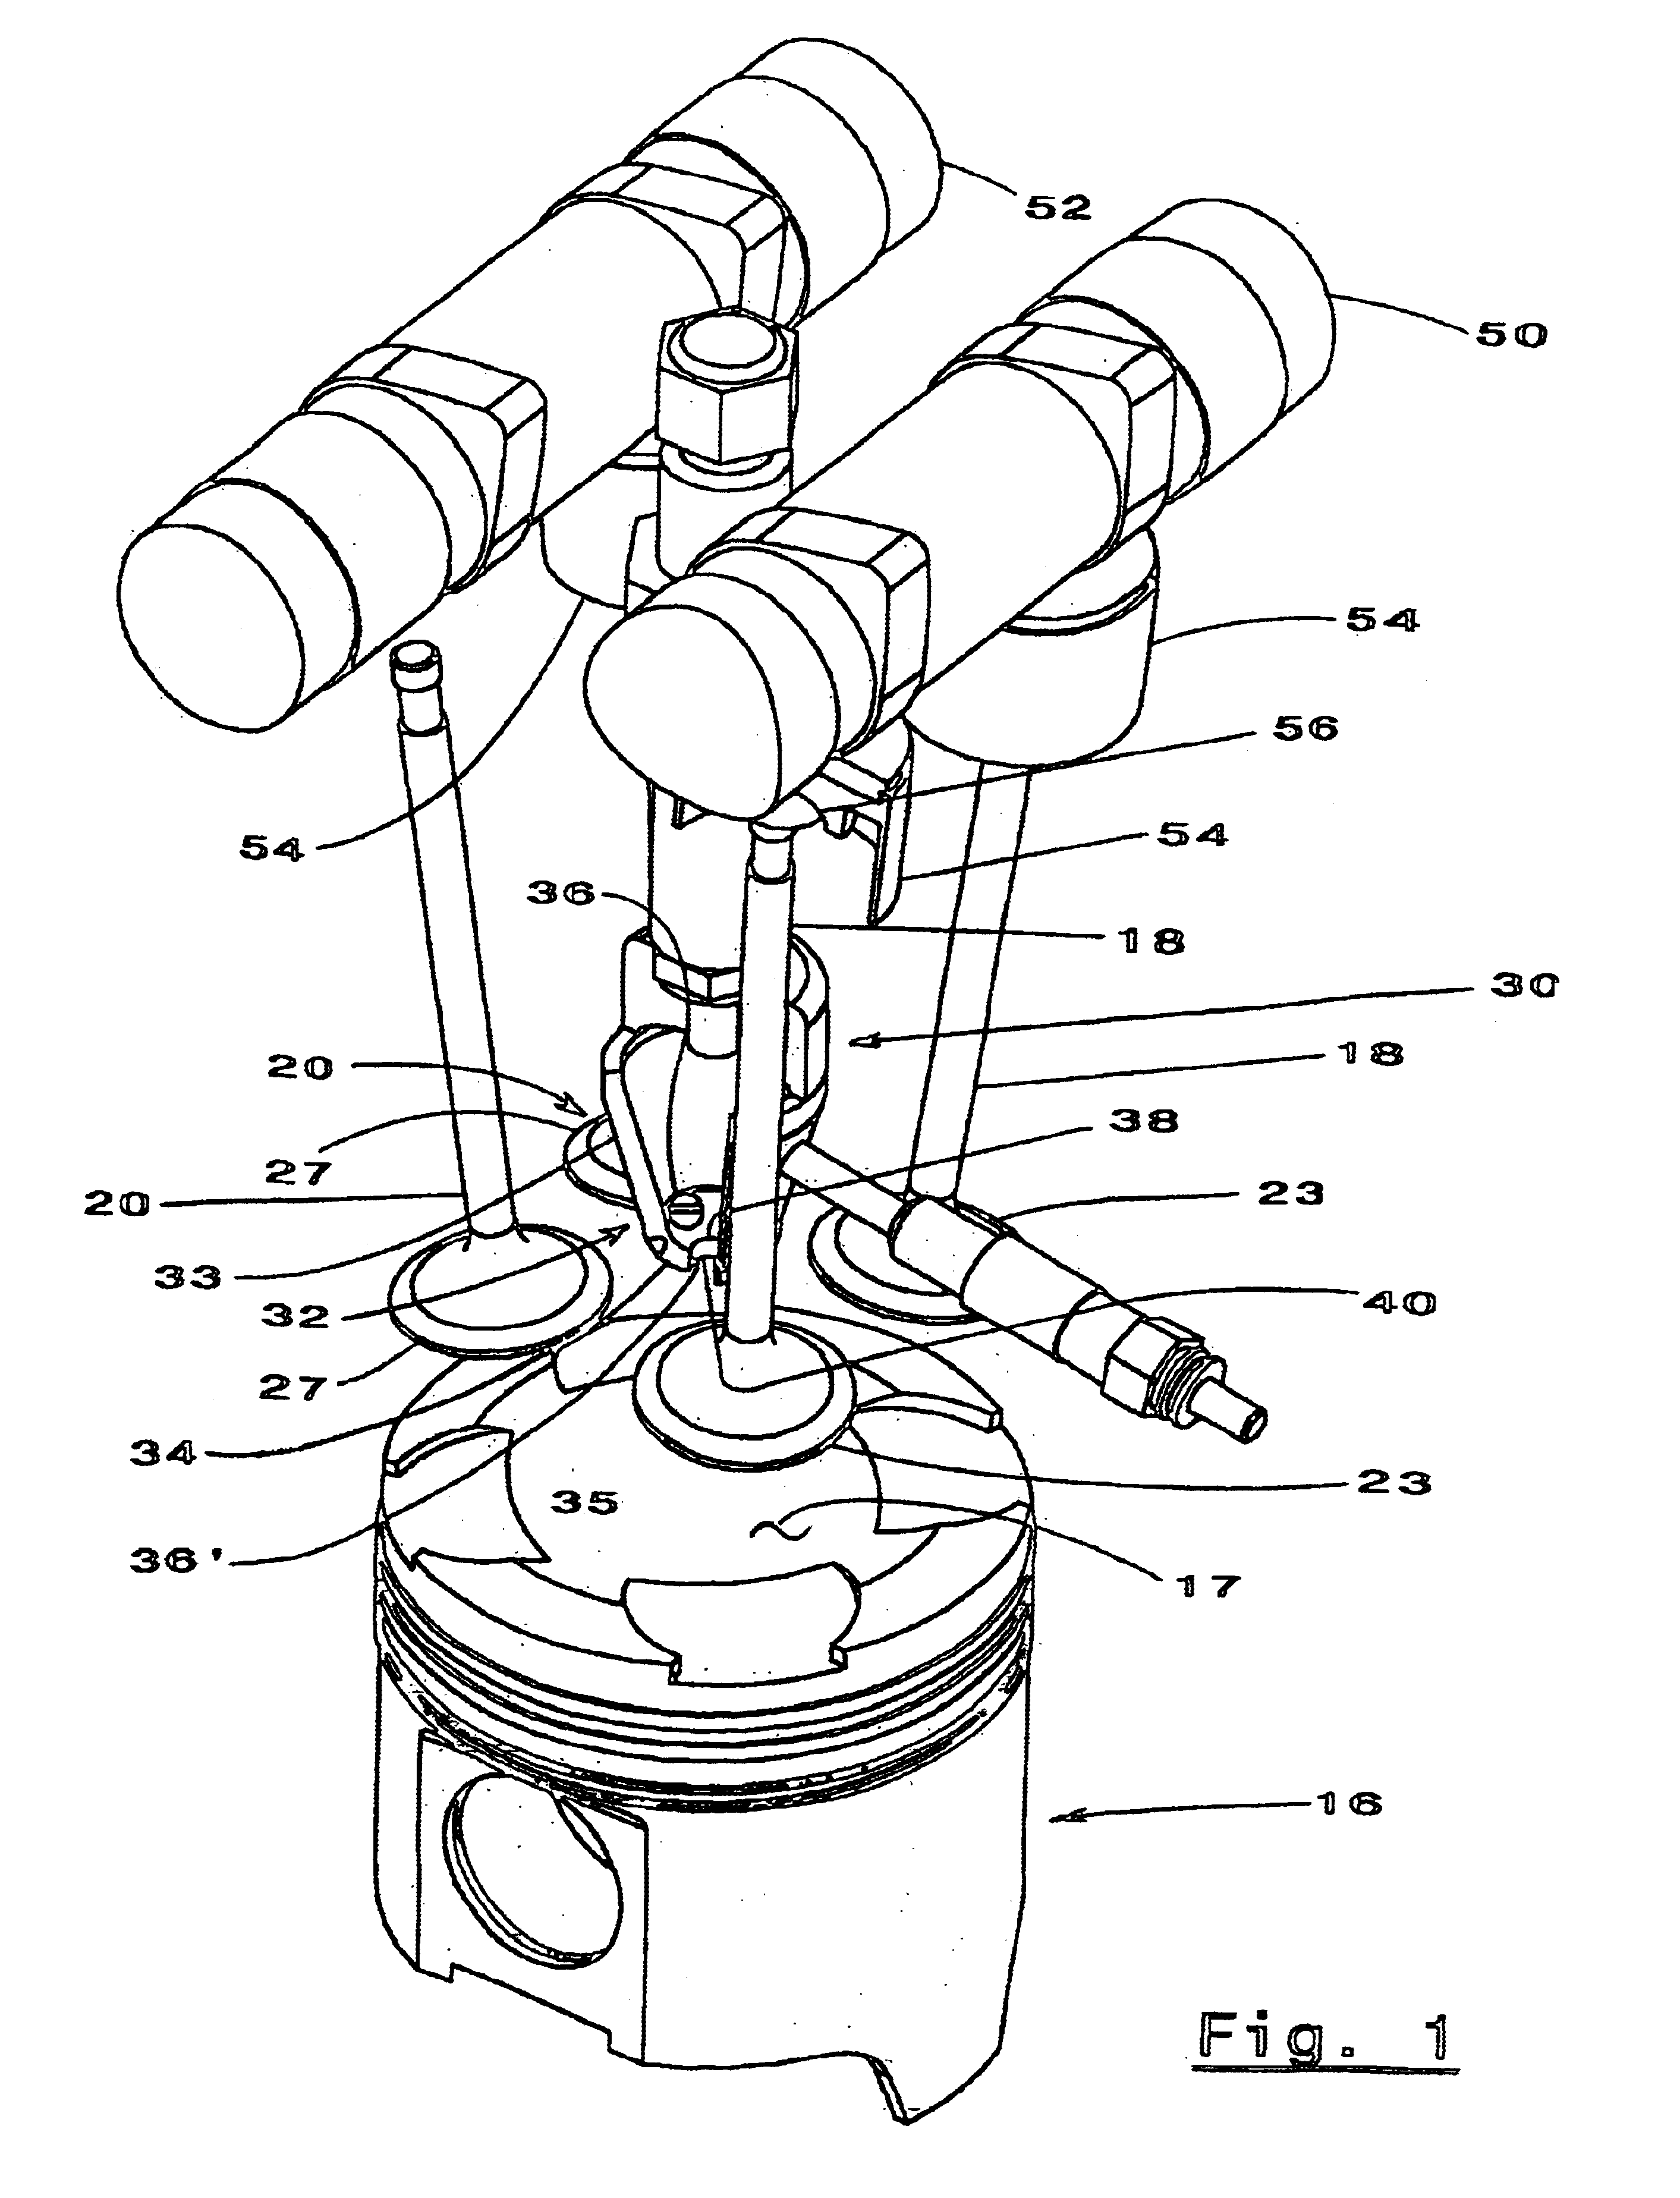 Prechamber combustion system